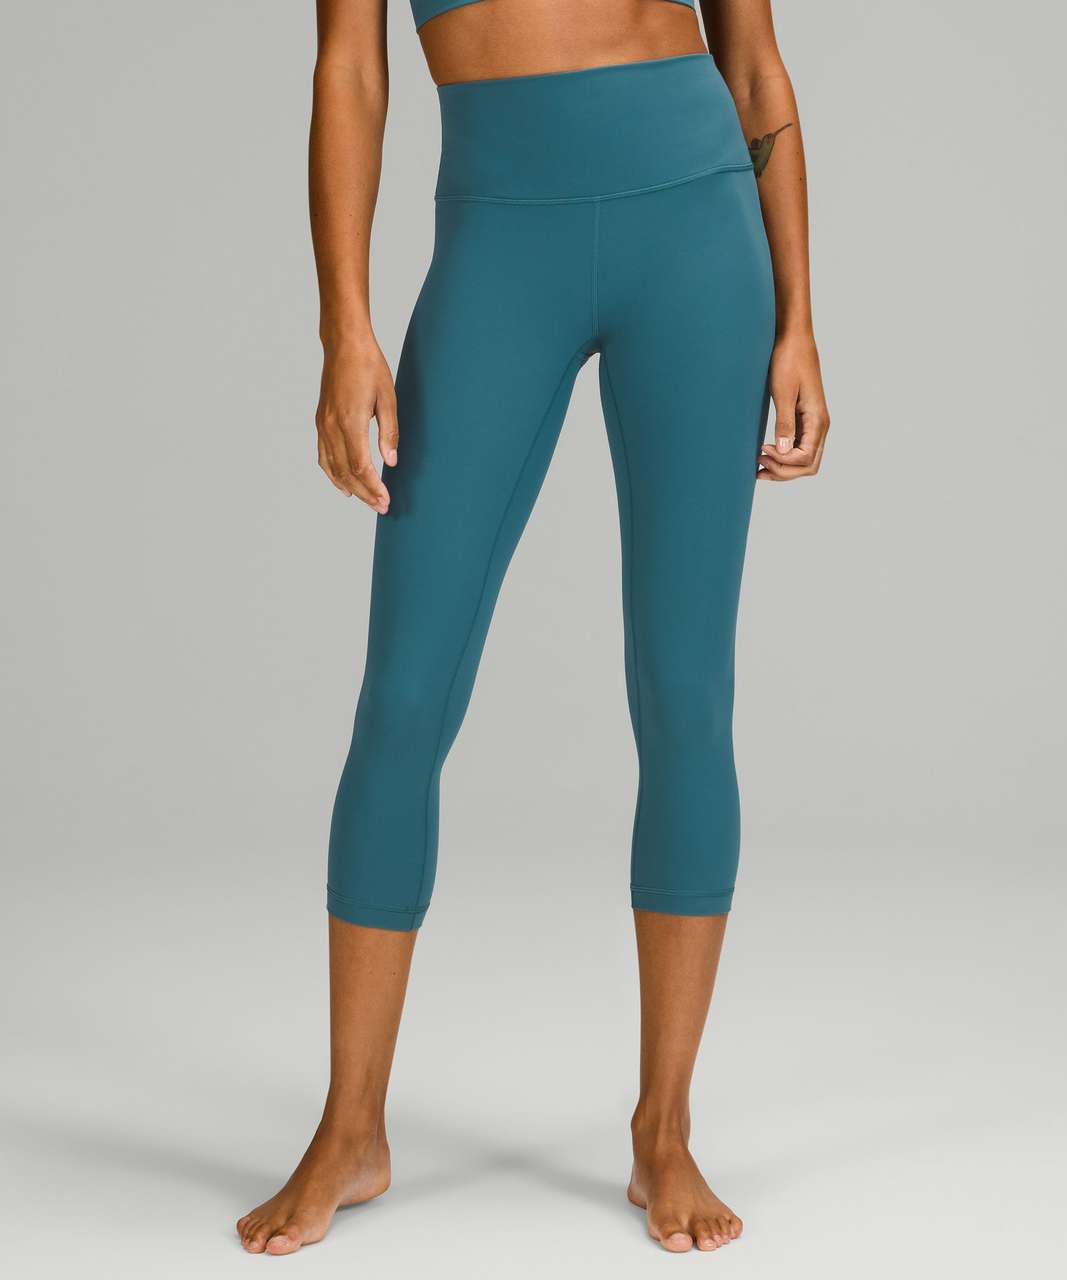 LULULEMON WUNDER TRAIN High Rise Crop 21” Chambray Everlux Size 4 NWT  $80.00 - PicClick